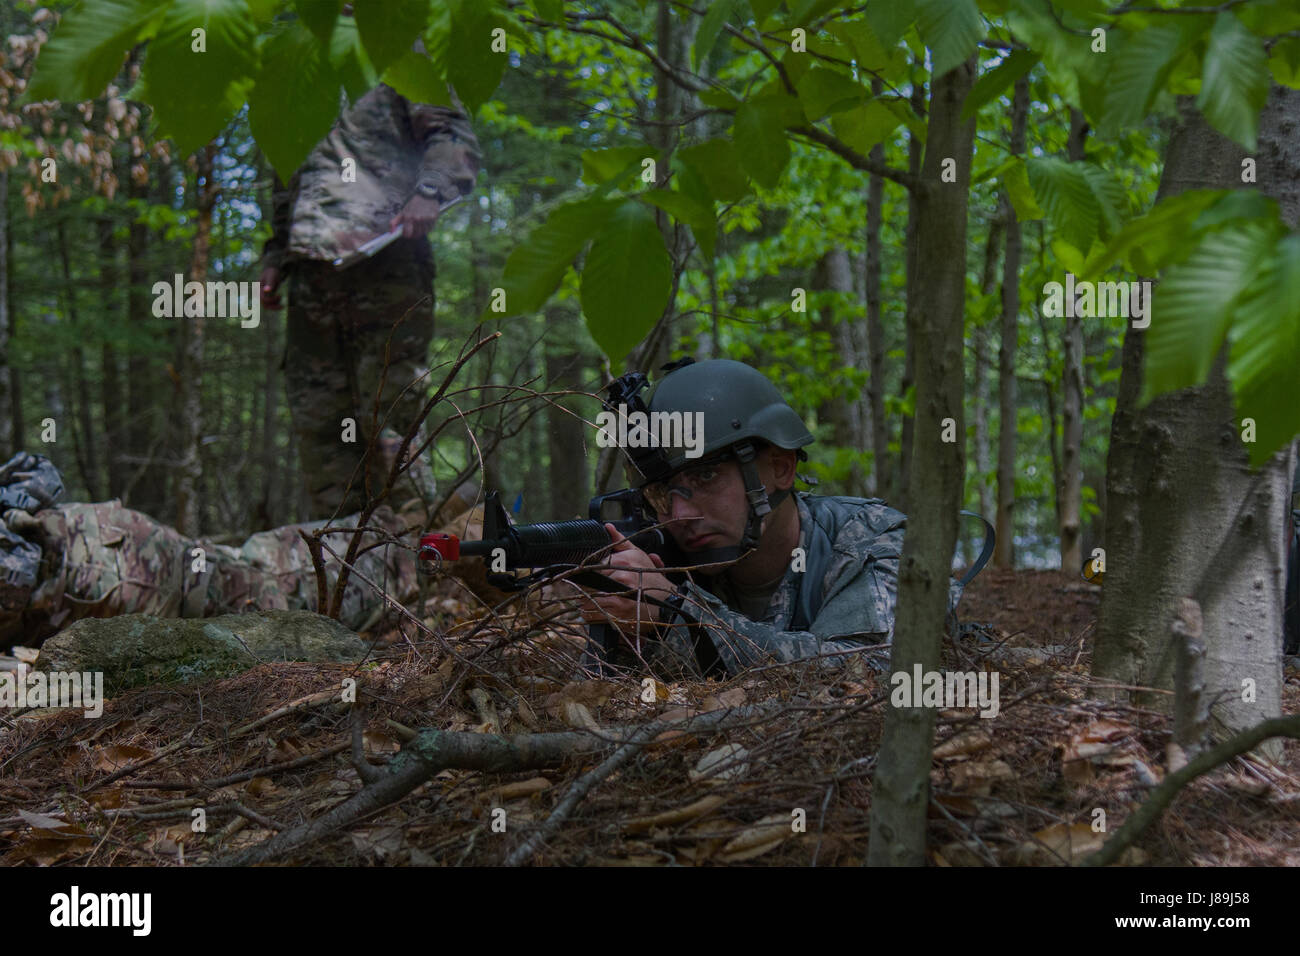 A U.S. Army officer candidate provides security during a reconnaissance operations lane at New Hampshire National Guard Training Site in Center Strafford, Nh., May 19, 2017. Soldiers from Connecticut, Maine, Massachusetts, New Hampshire, New Jersey, New York, Rhode Island, and Vermont participated in the Officer Candidate School Field Leadership Exercise in preparation for graduation and commission. (U.S. Army National Guard photo by Spc. Avery Cunningham) Stock Photo